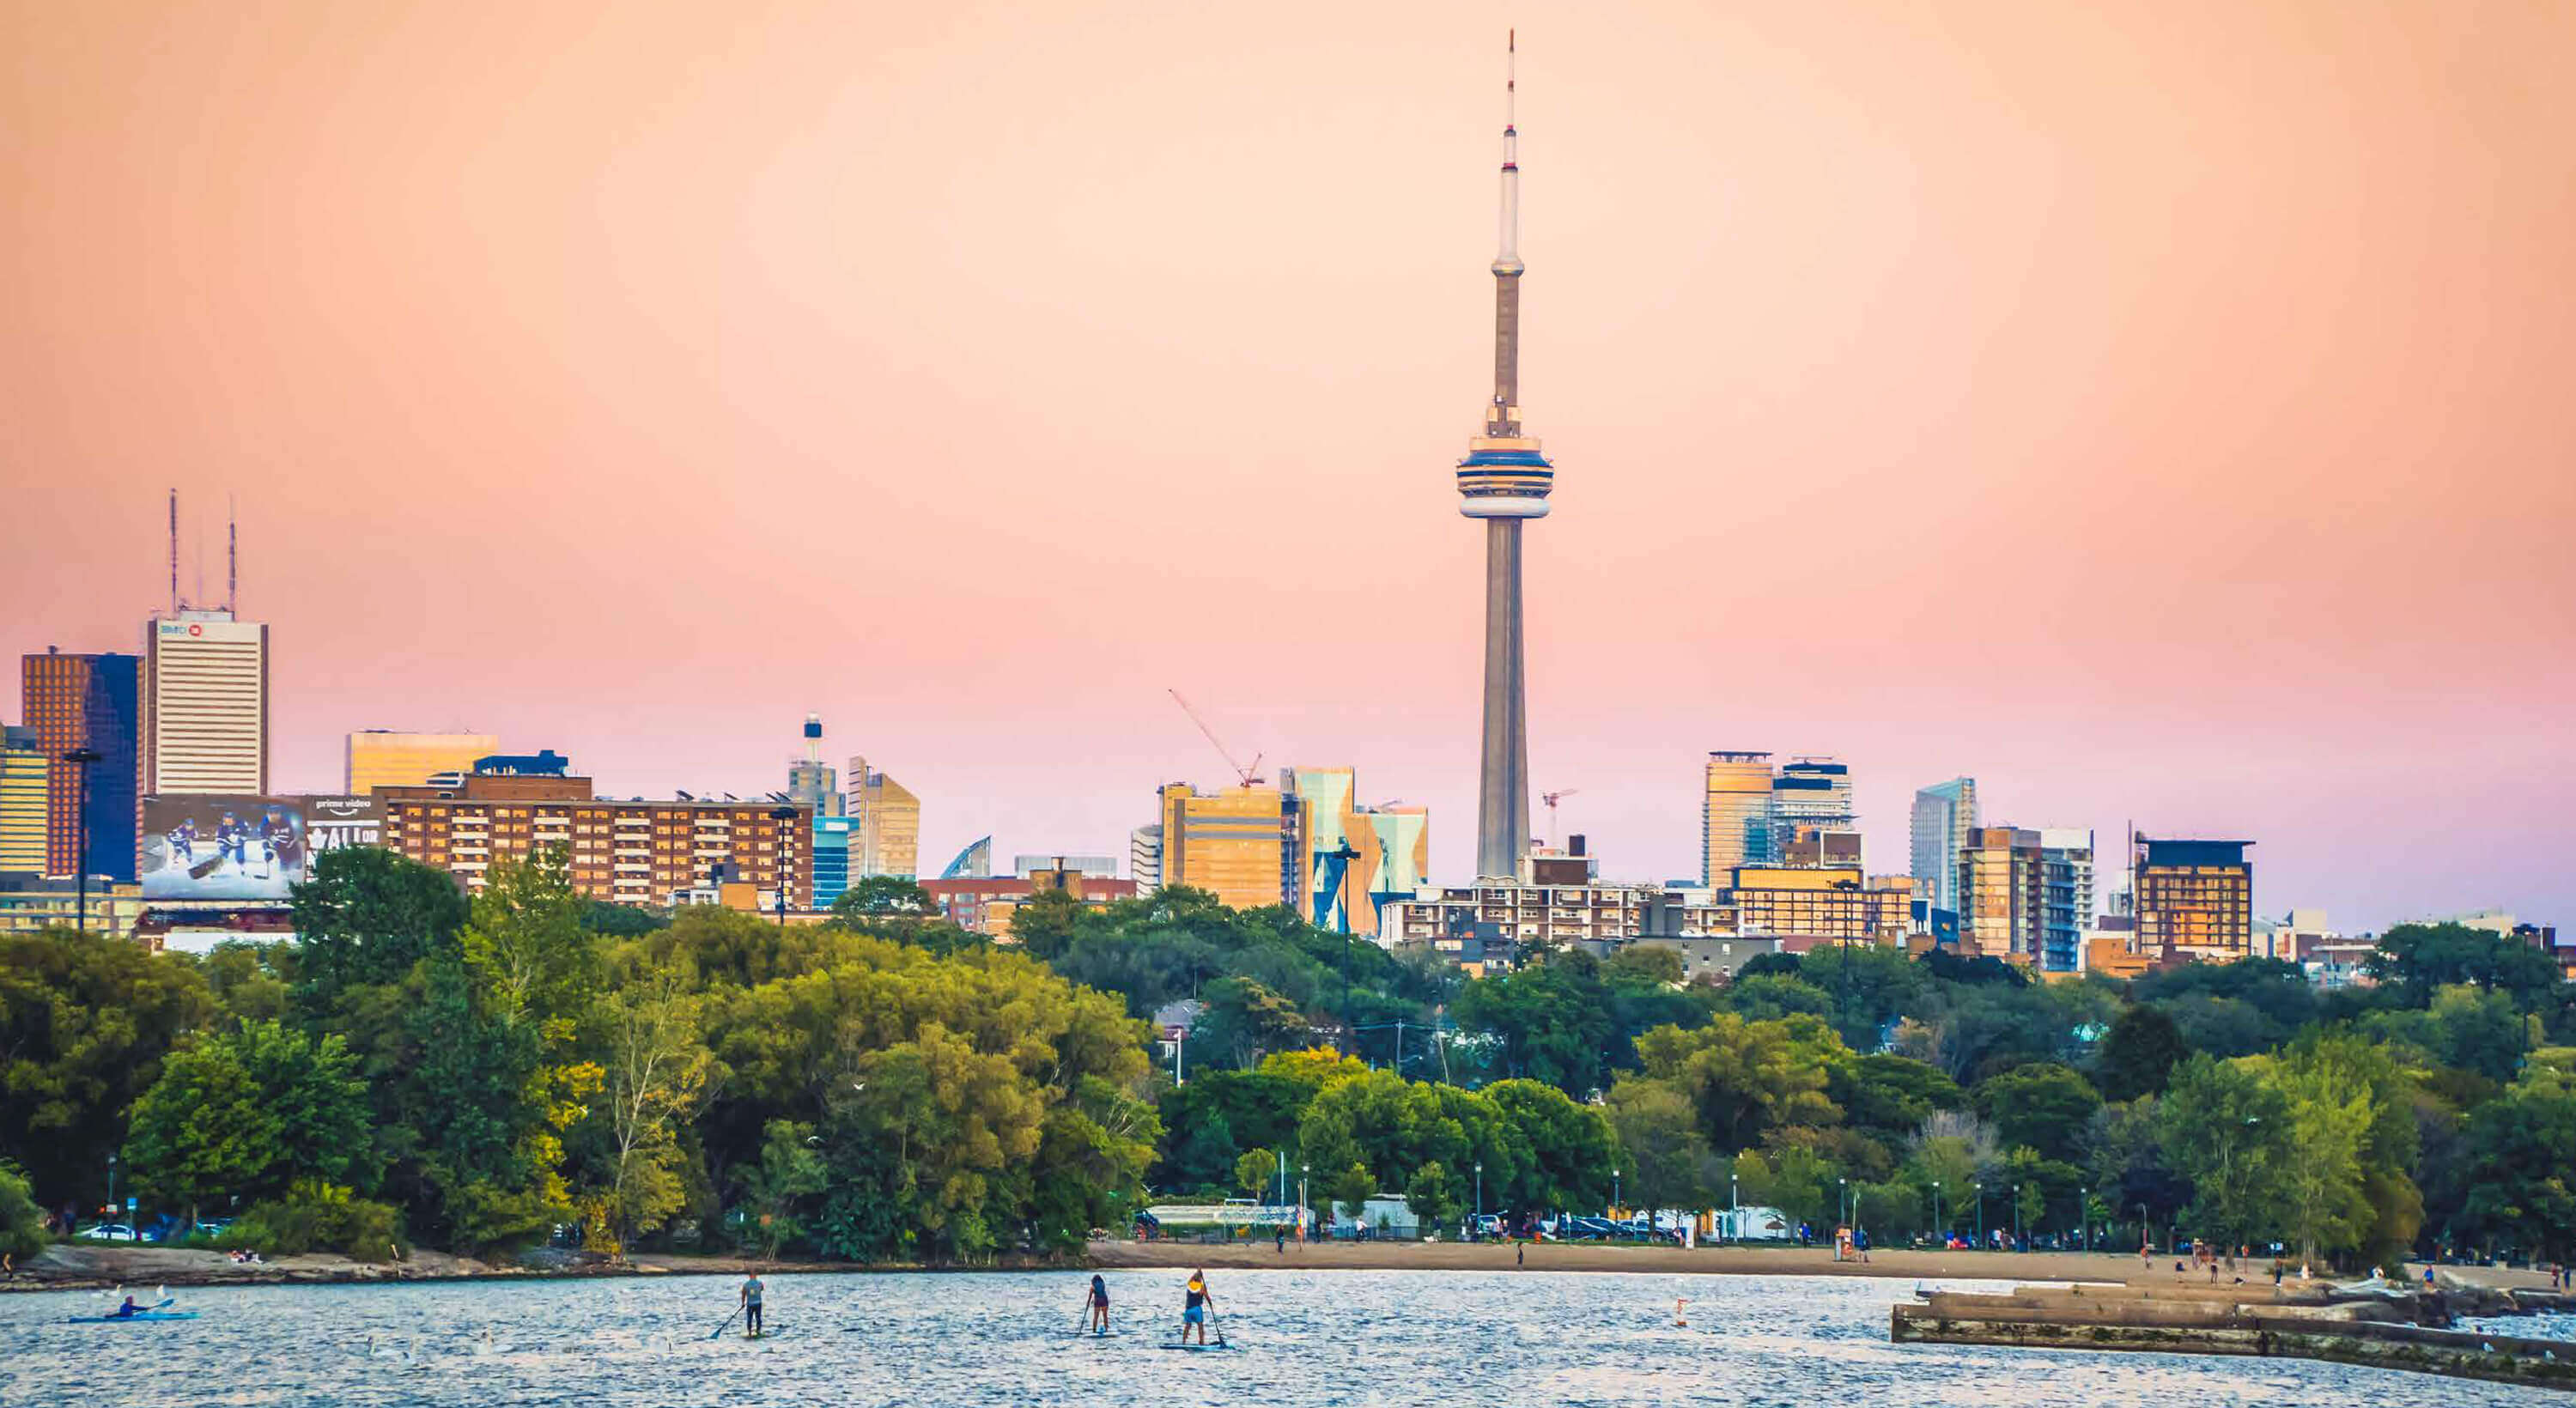 Kayakers, paddle boarders enjoy Lake Ontario, CN Tower and Toronto skyline in the backdrop.